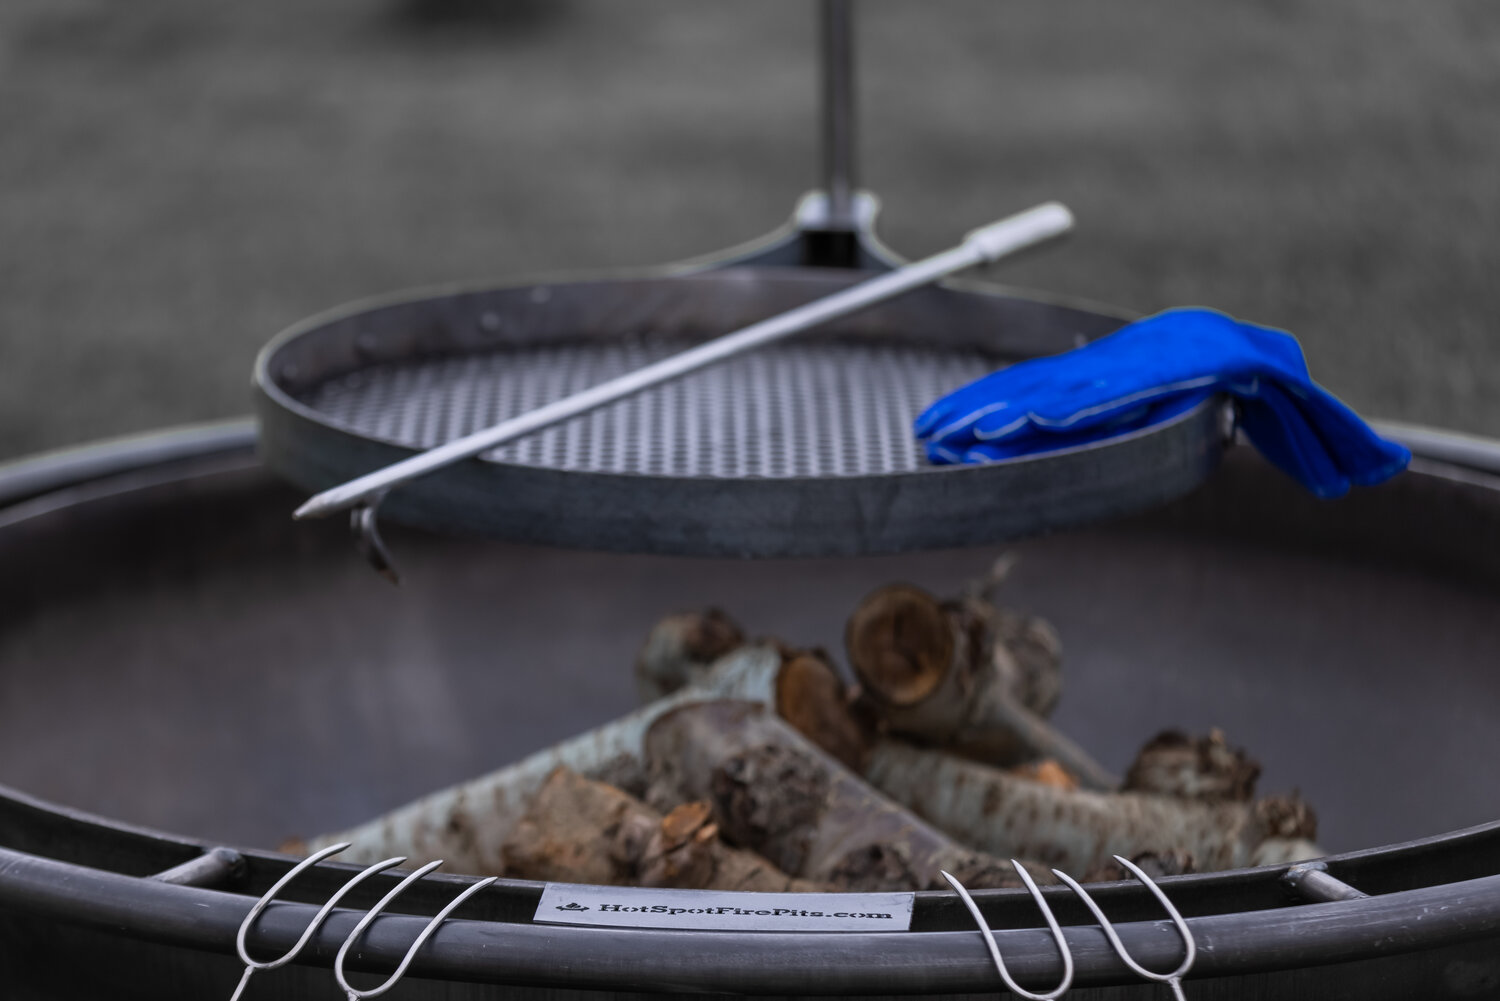 Artisan Grill Tools - Outdoor Fire Pit